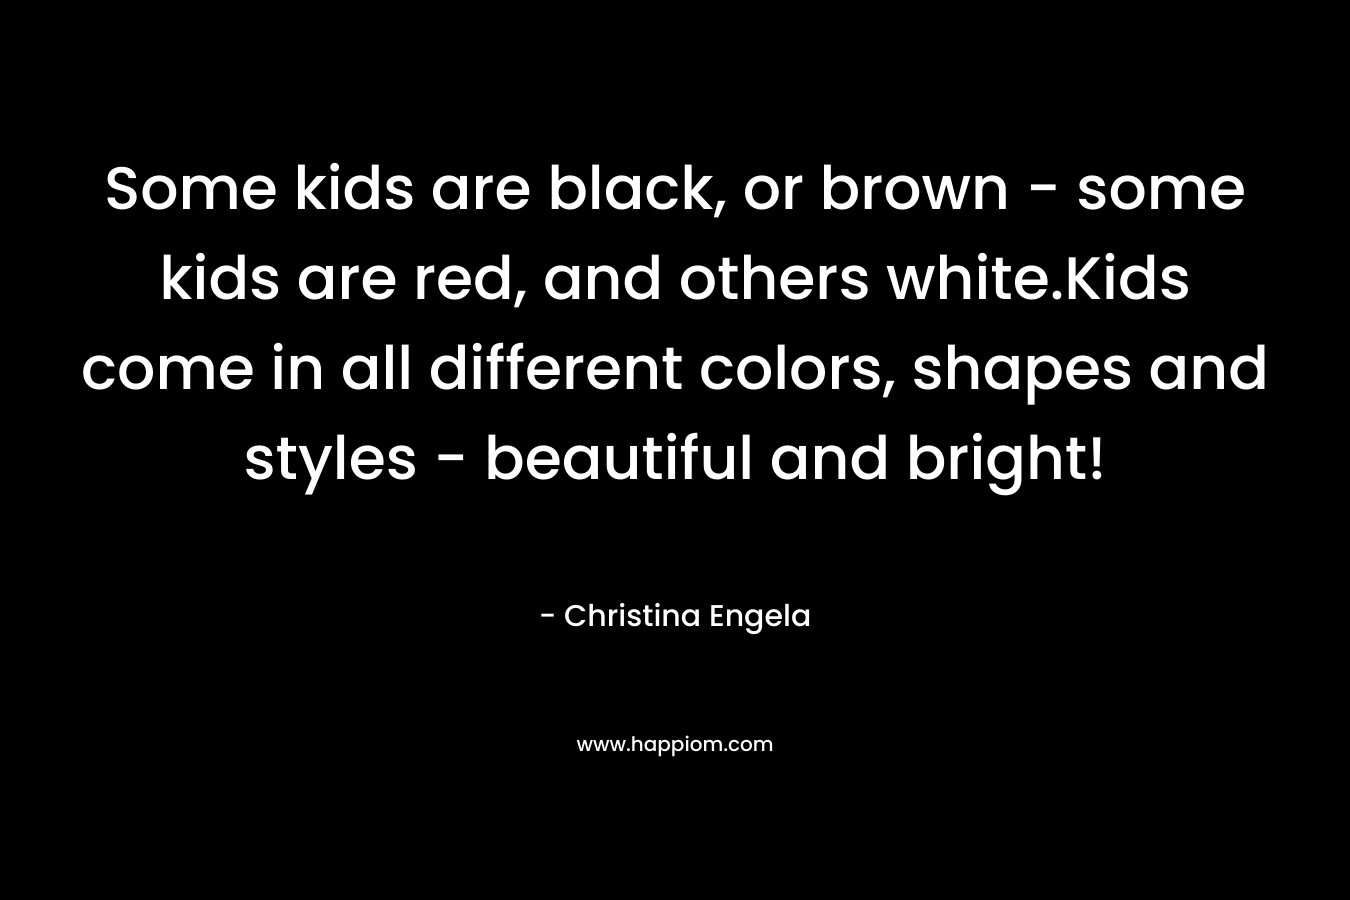 Some kids are black, or brown – some kids are red, and others white.Kids come in all different colors, shapes and styles – beautiful and bright! – Christina Engela